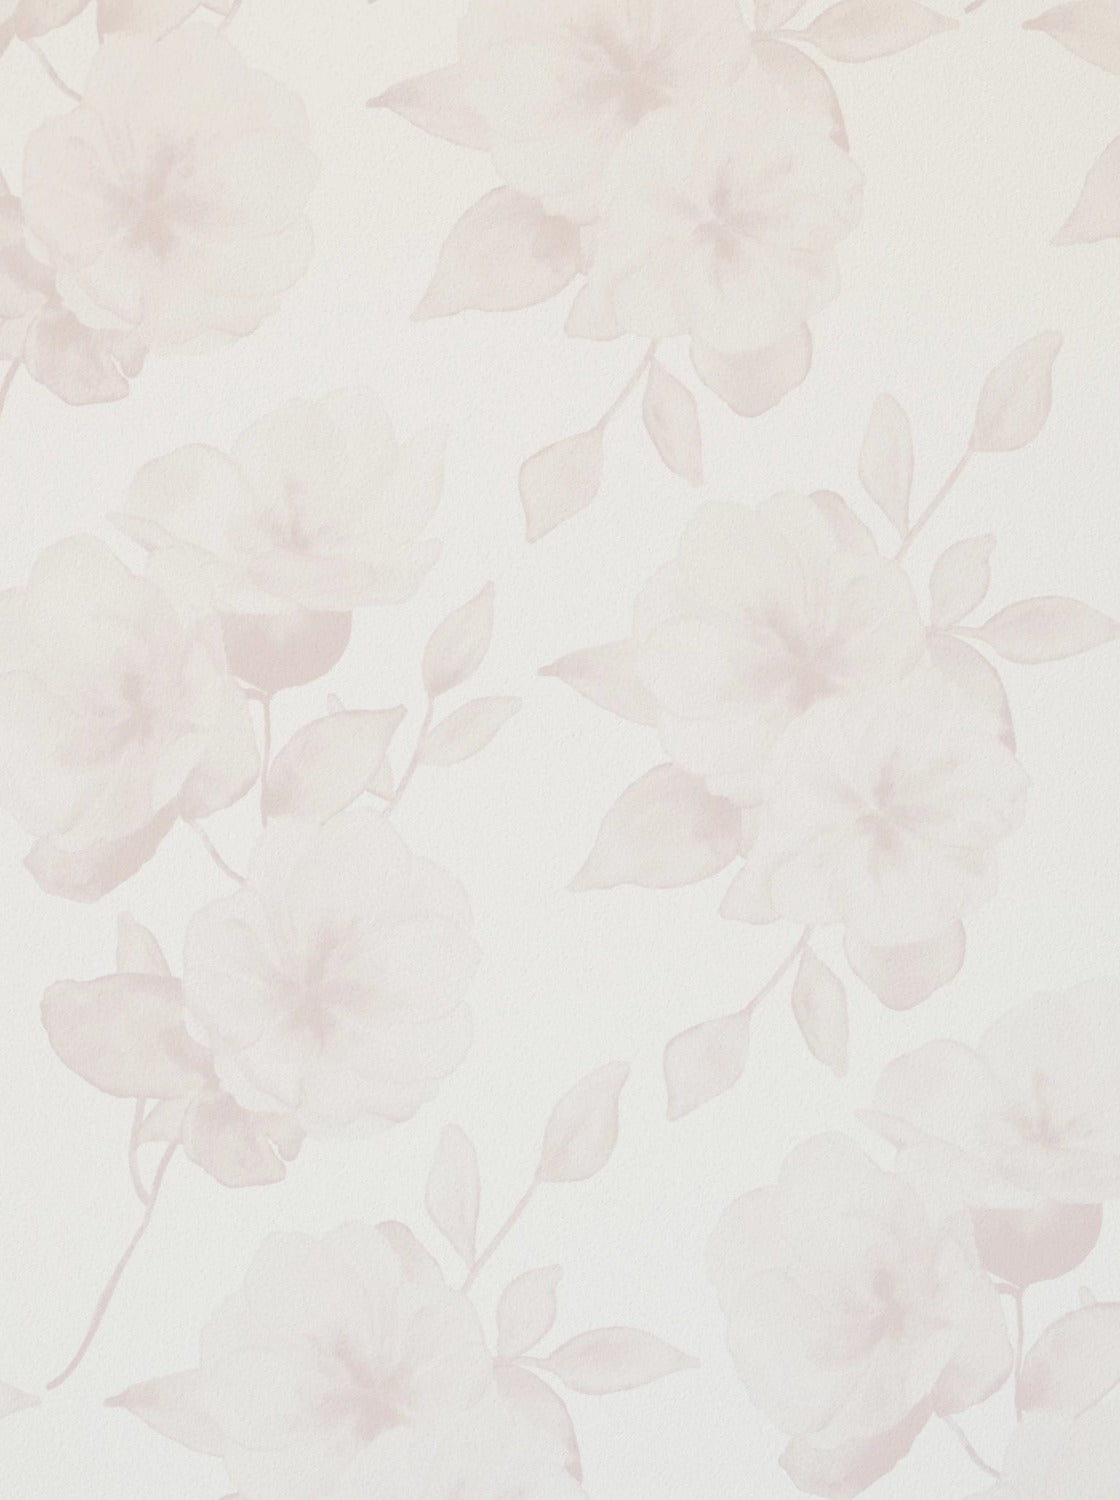 A close-up texture shot of the Minimal Floral Wallpaper V, displaying a delicate pattern of watercolor blush flowers with subtle shading on a creamy background. The soft pastel tones create a gentle and serene atmosphere.